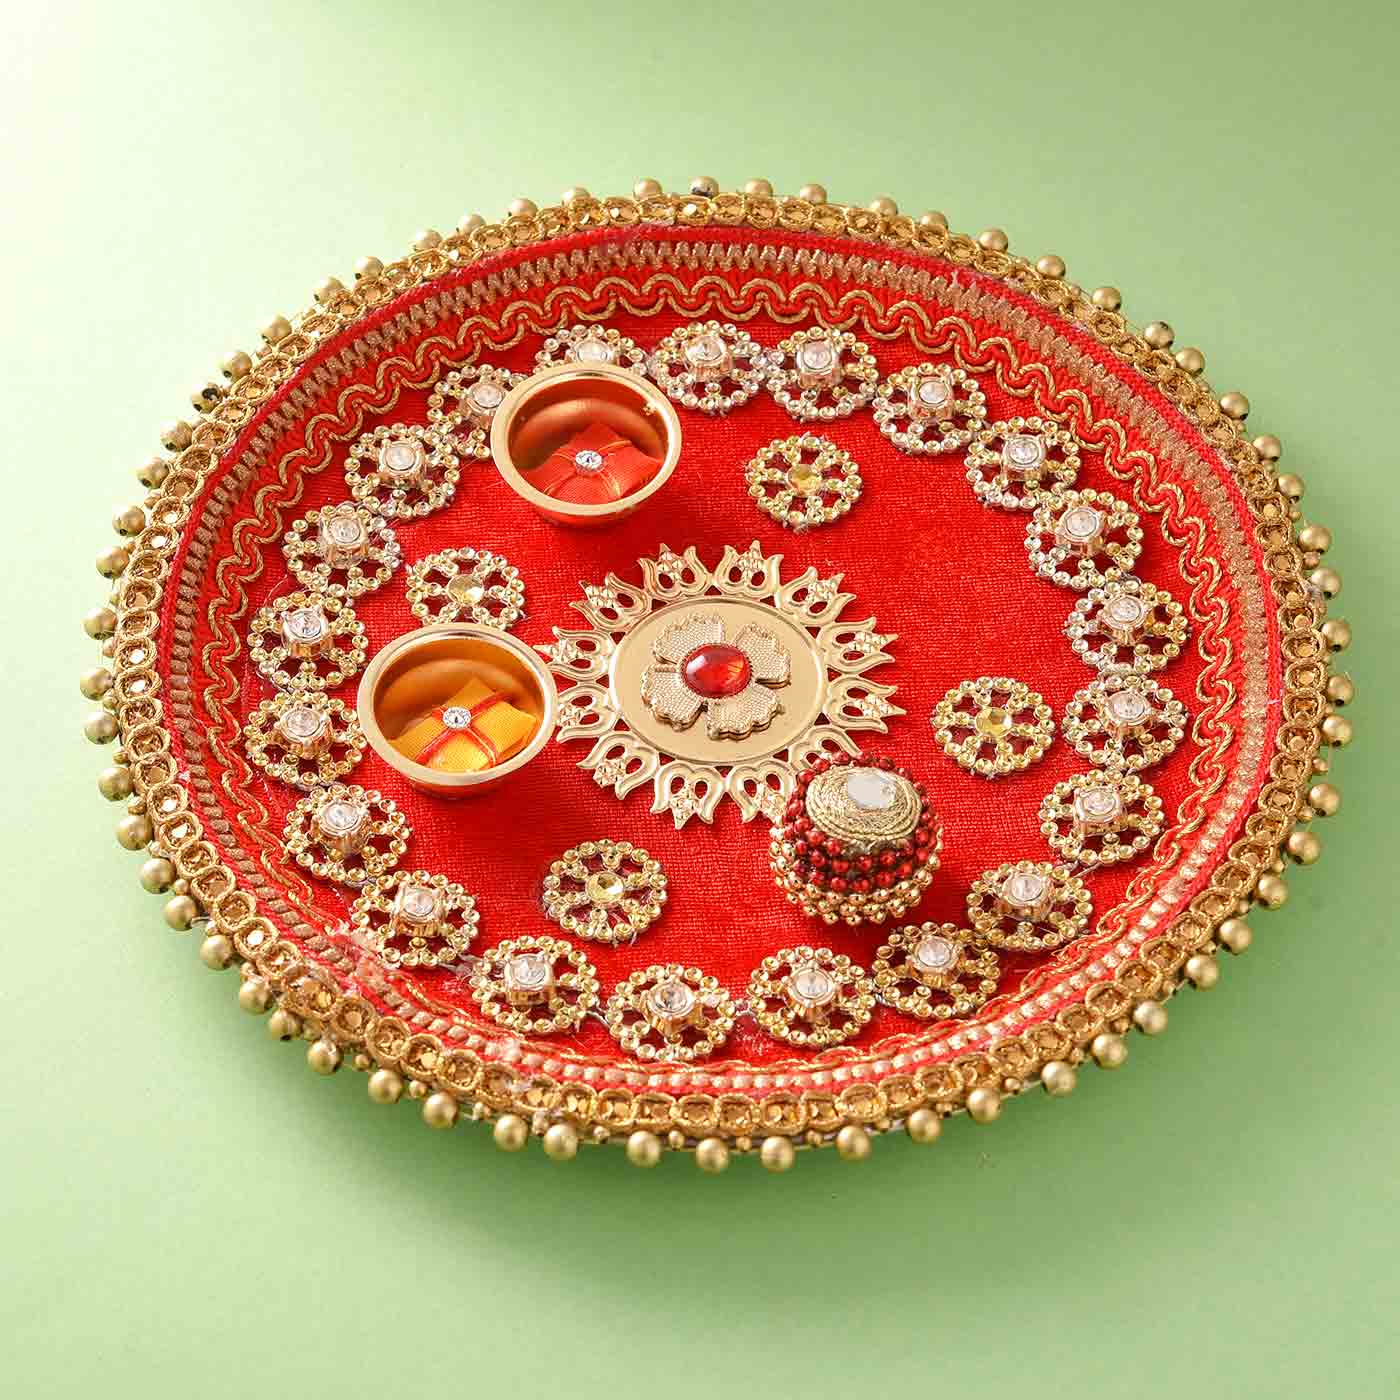 Golden Charm Red Color Rakhi Puja Thali 8 Inches - 12 Pcs Pack